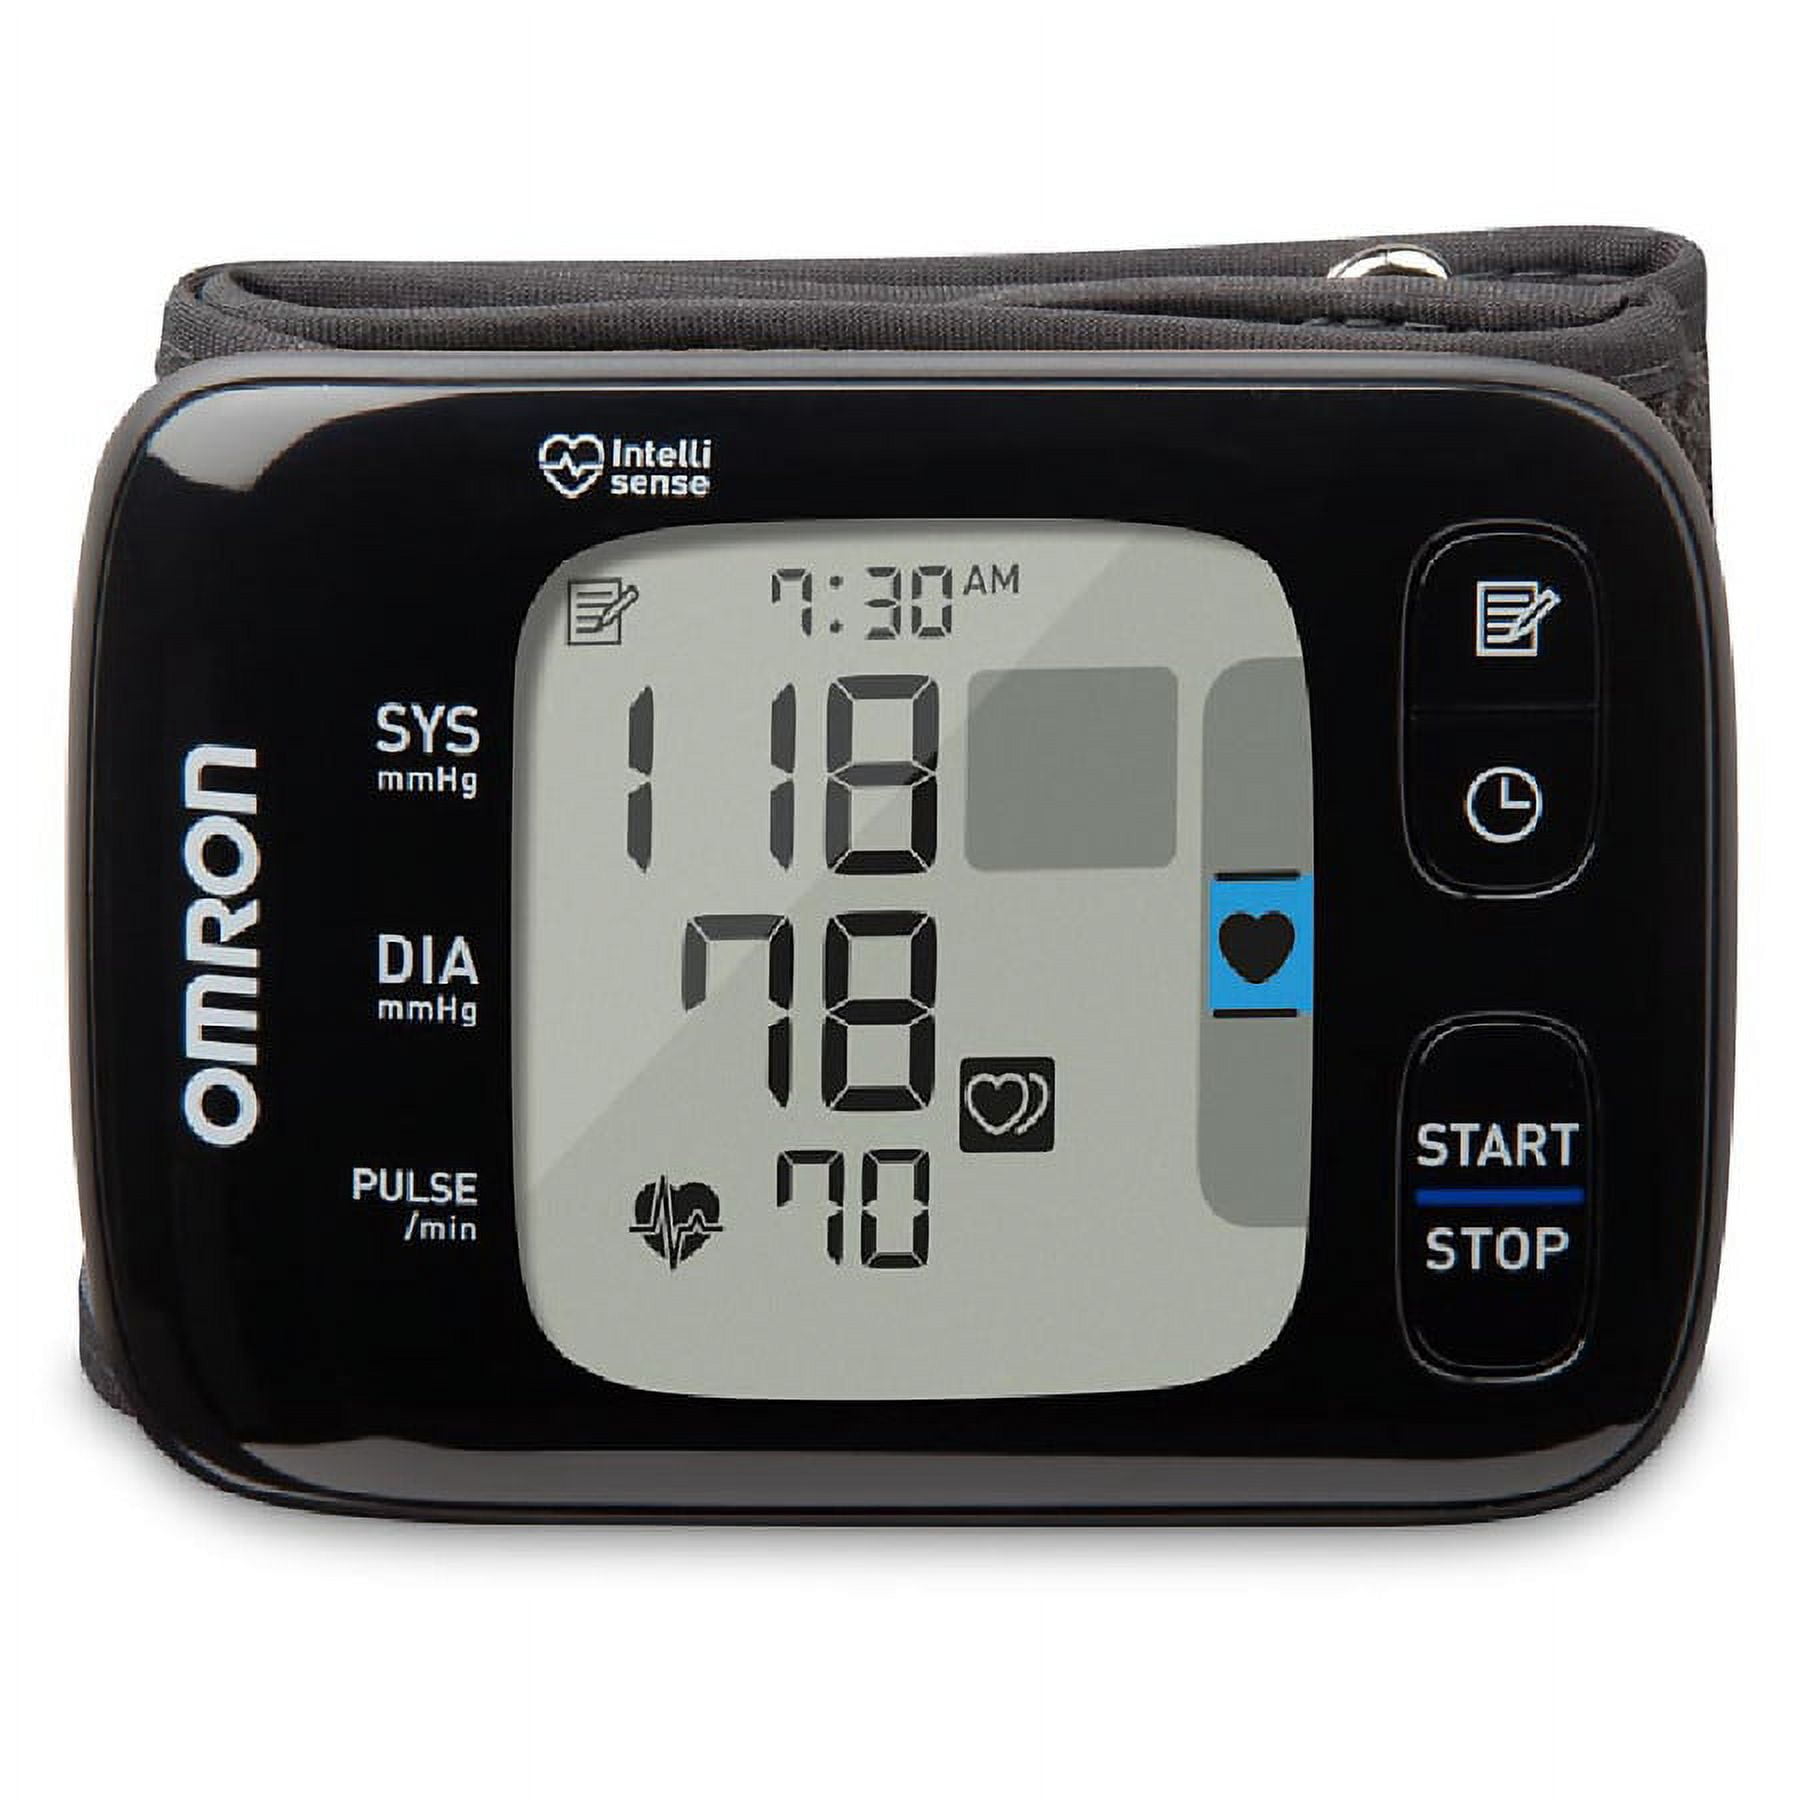 Omron 7 Series Blue Tooth Wireless Upper Arm Blood Pressure Monitor with  Cuff that fits Standard and Large Arms (BP761) 